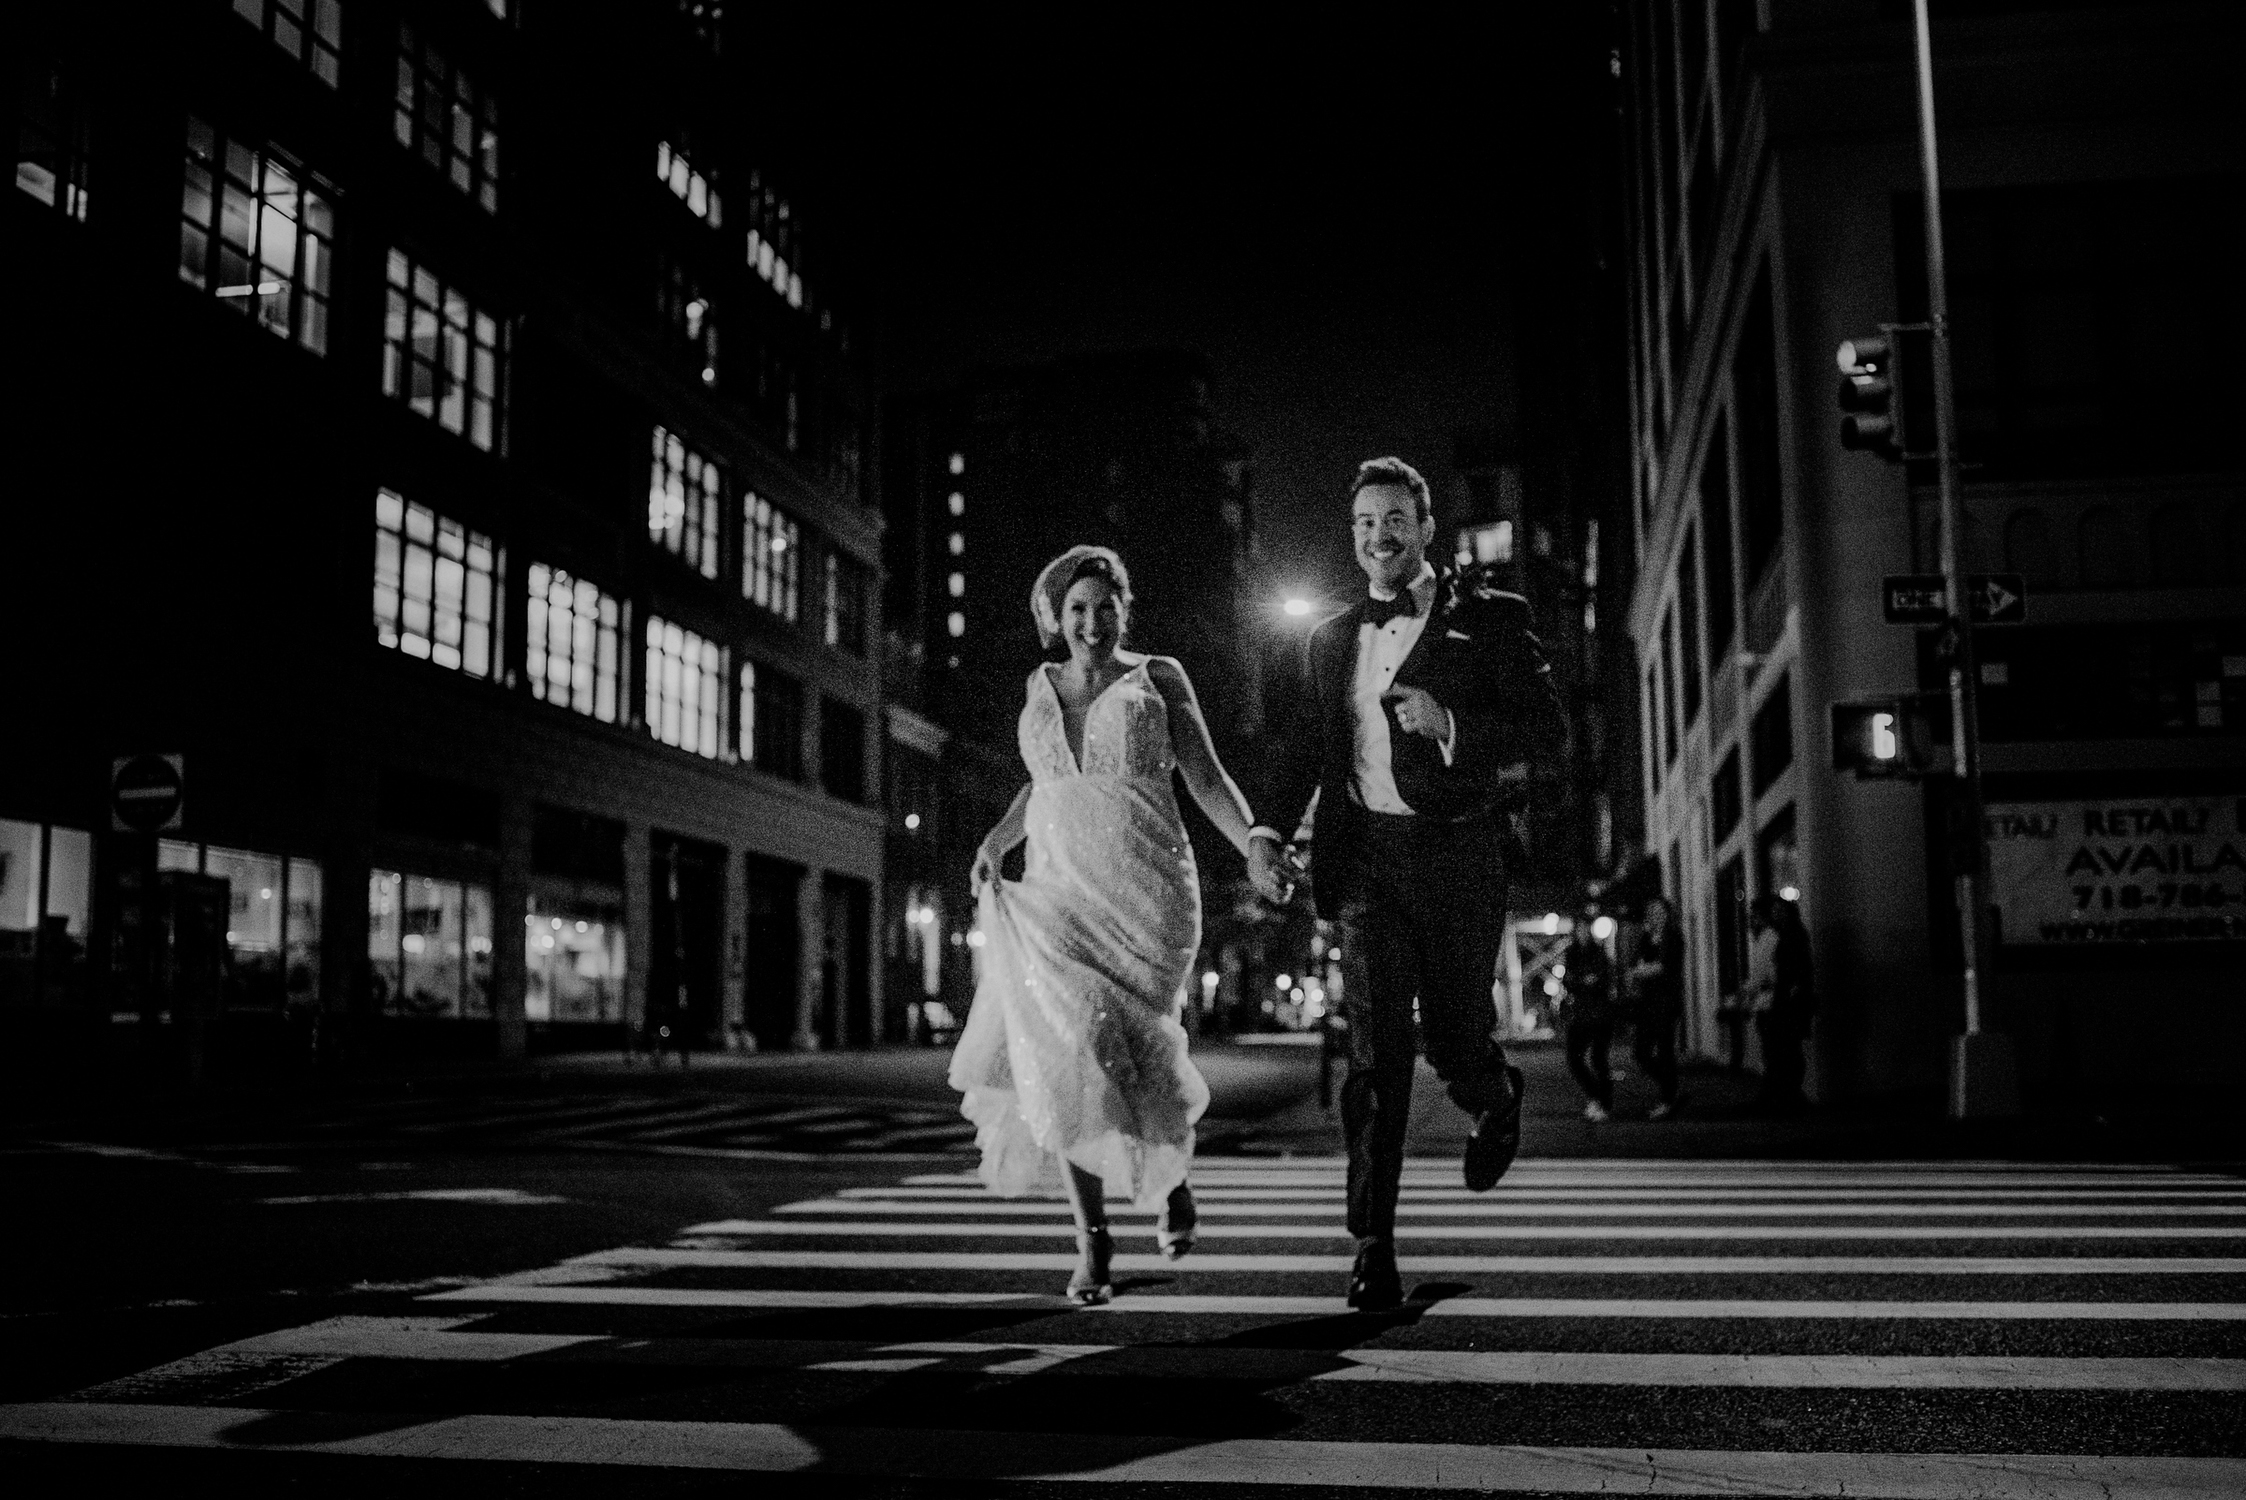 happy couple running through streets of nyc in wedding attire